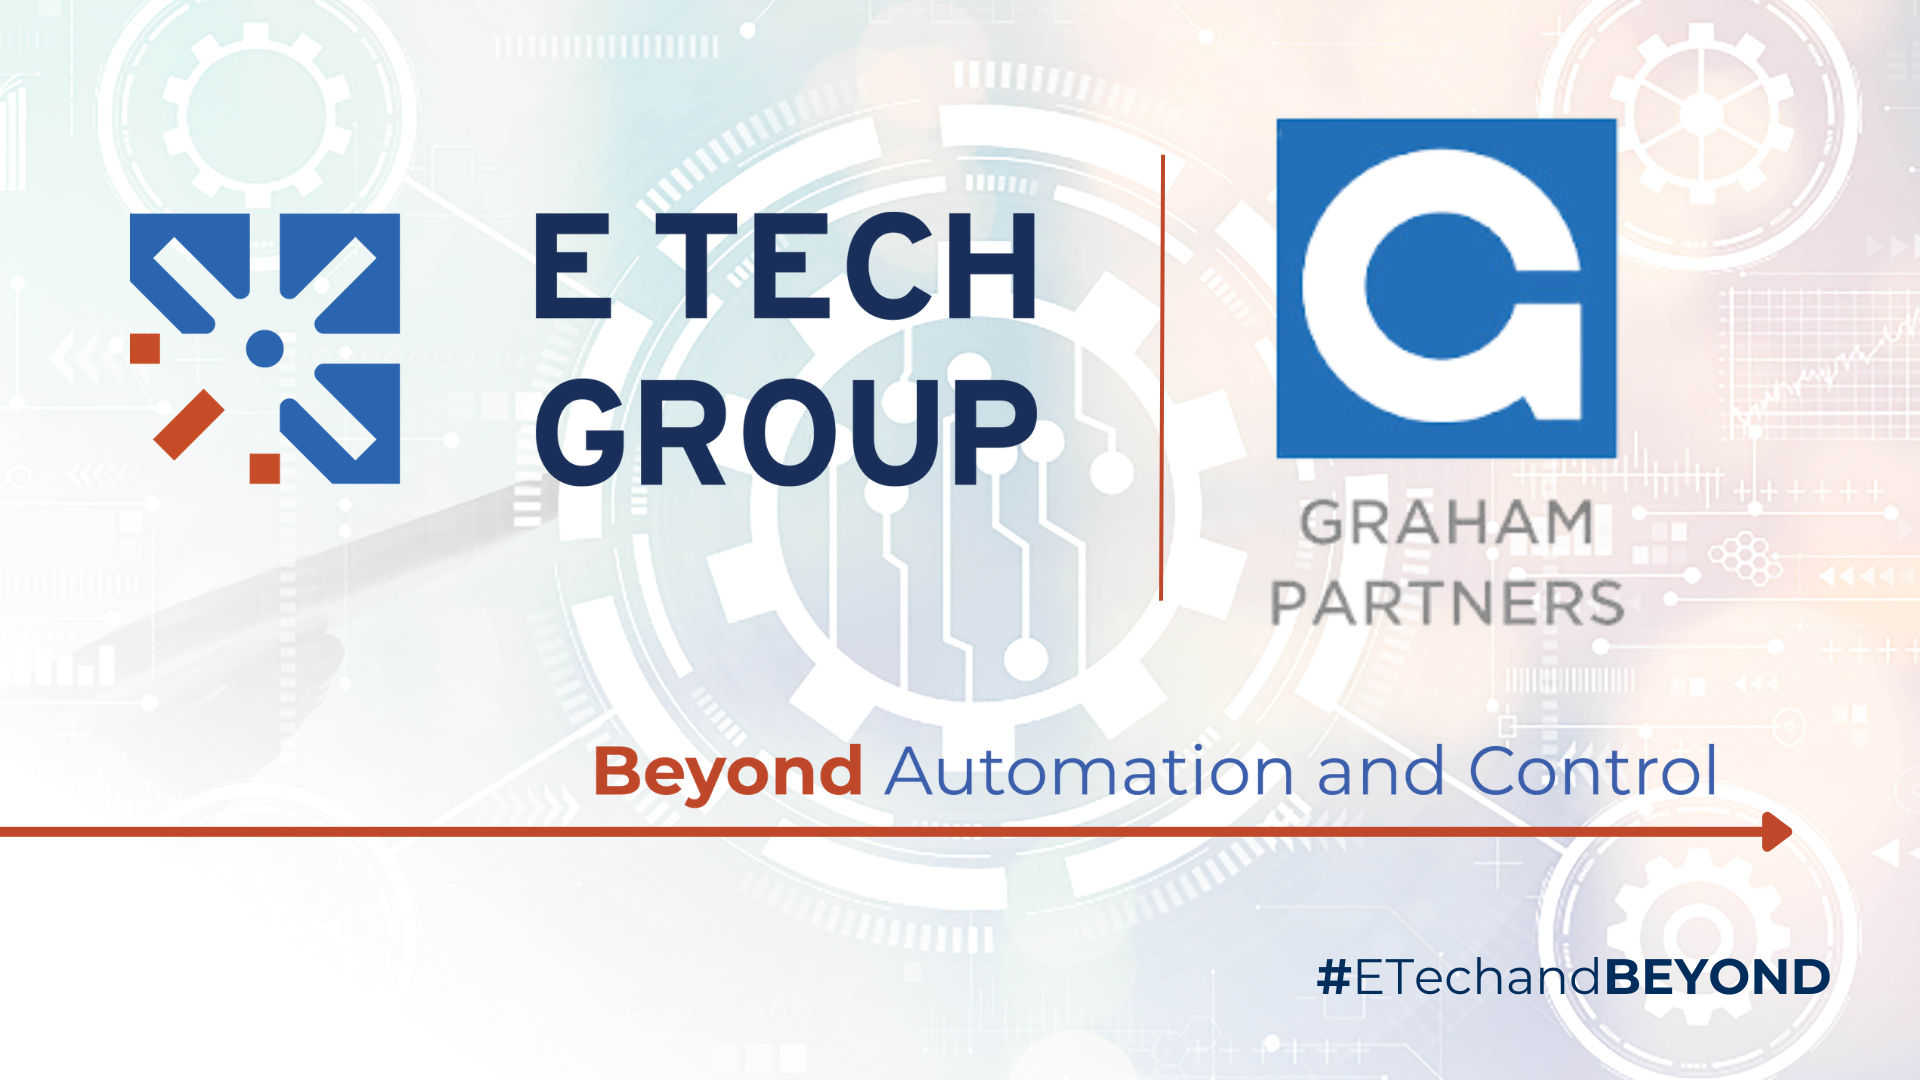 E Tech Group Secures New Investment from Graham Partners, Sets Stage for Continued Growth and Innovation